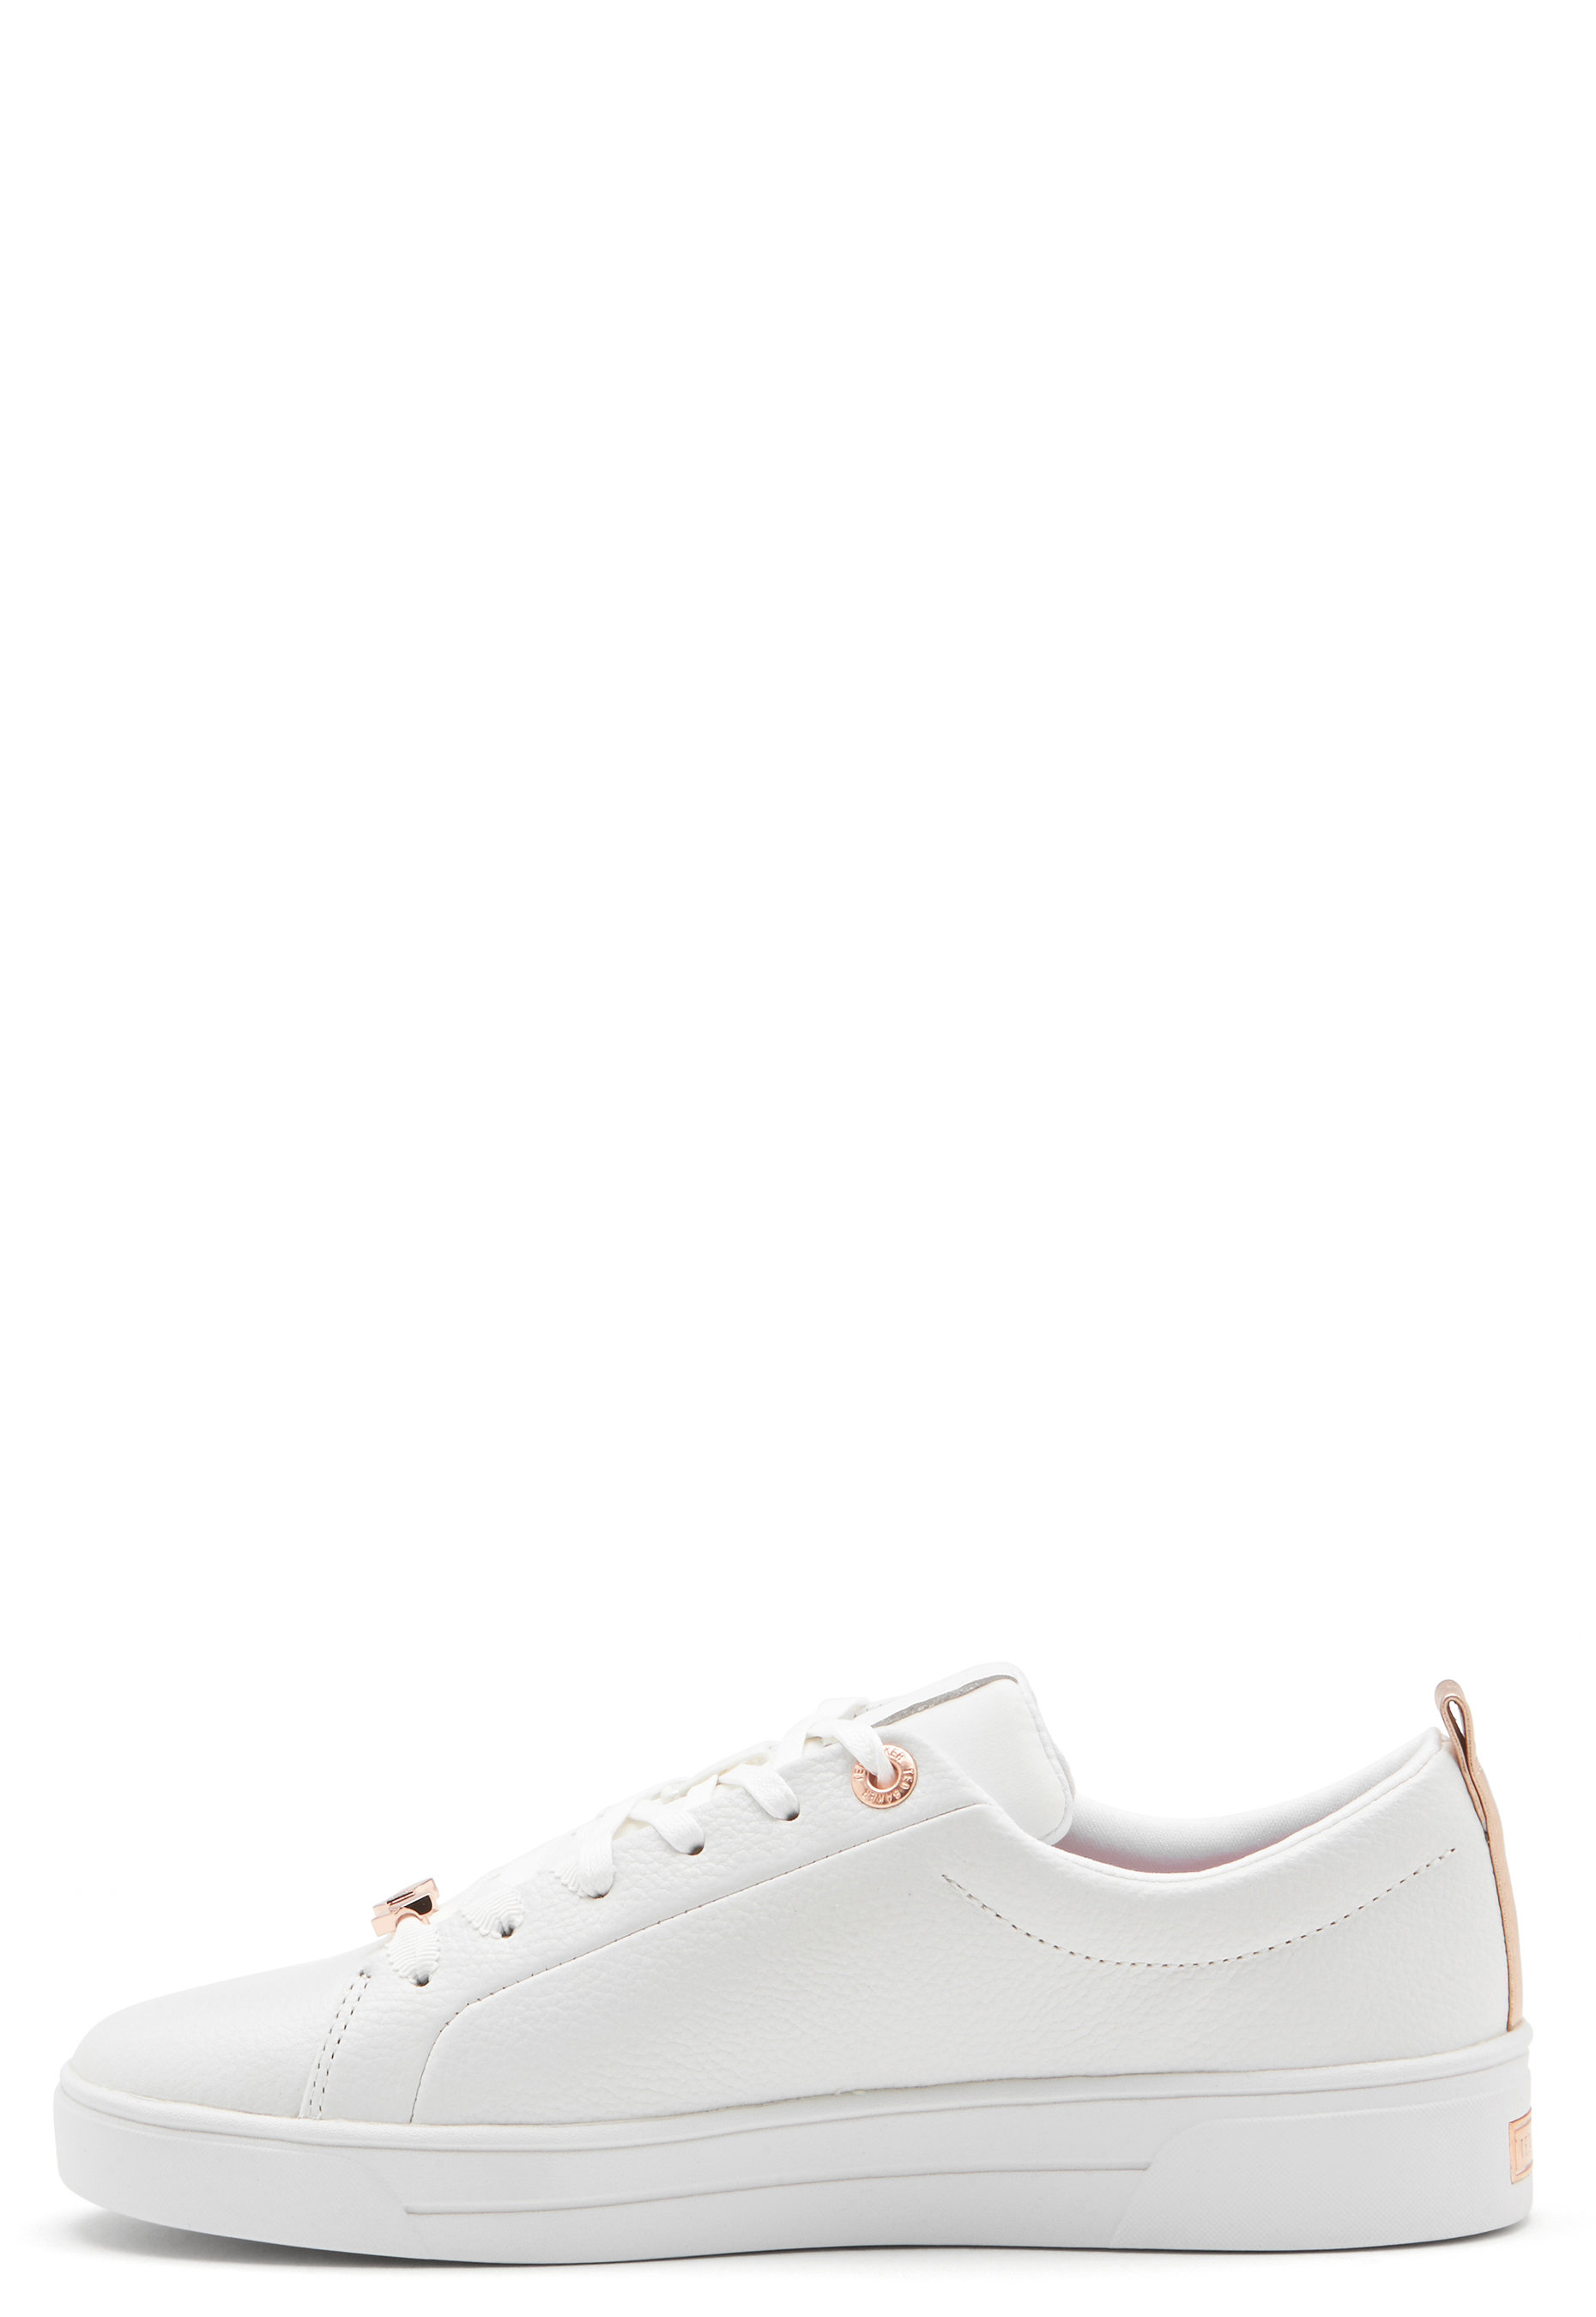 Ted Baker Gielli Shoes White - Bubbleroom